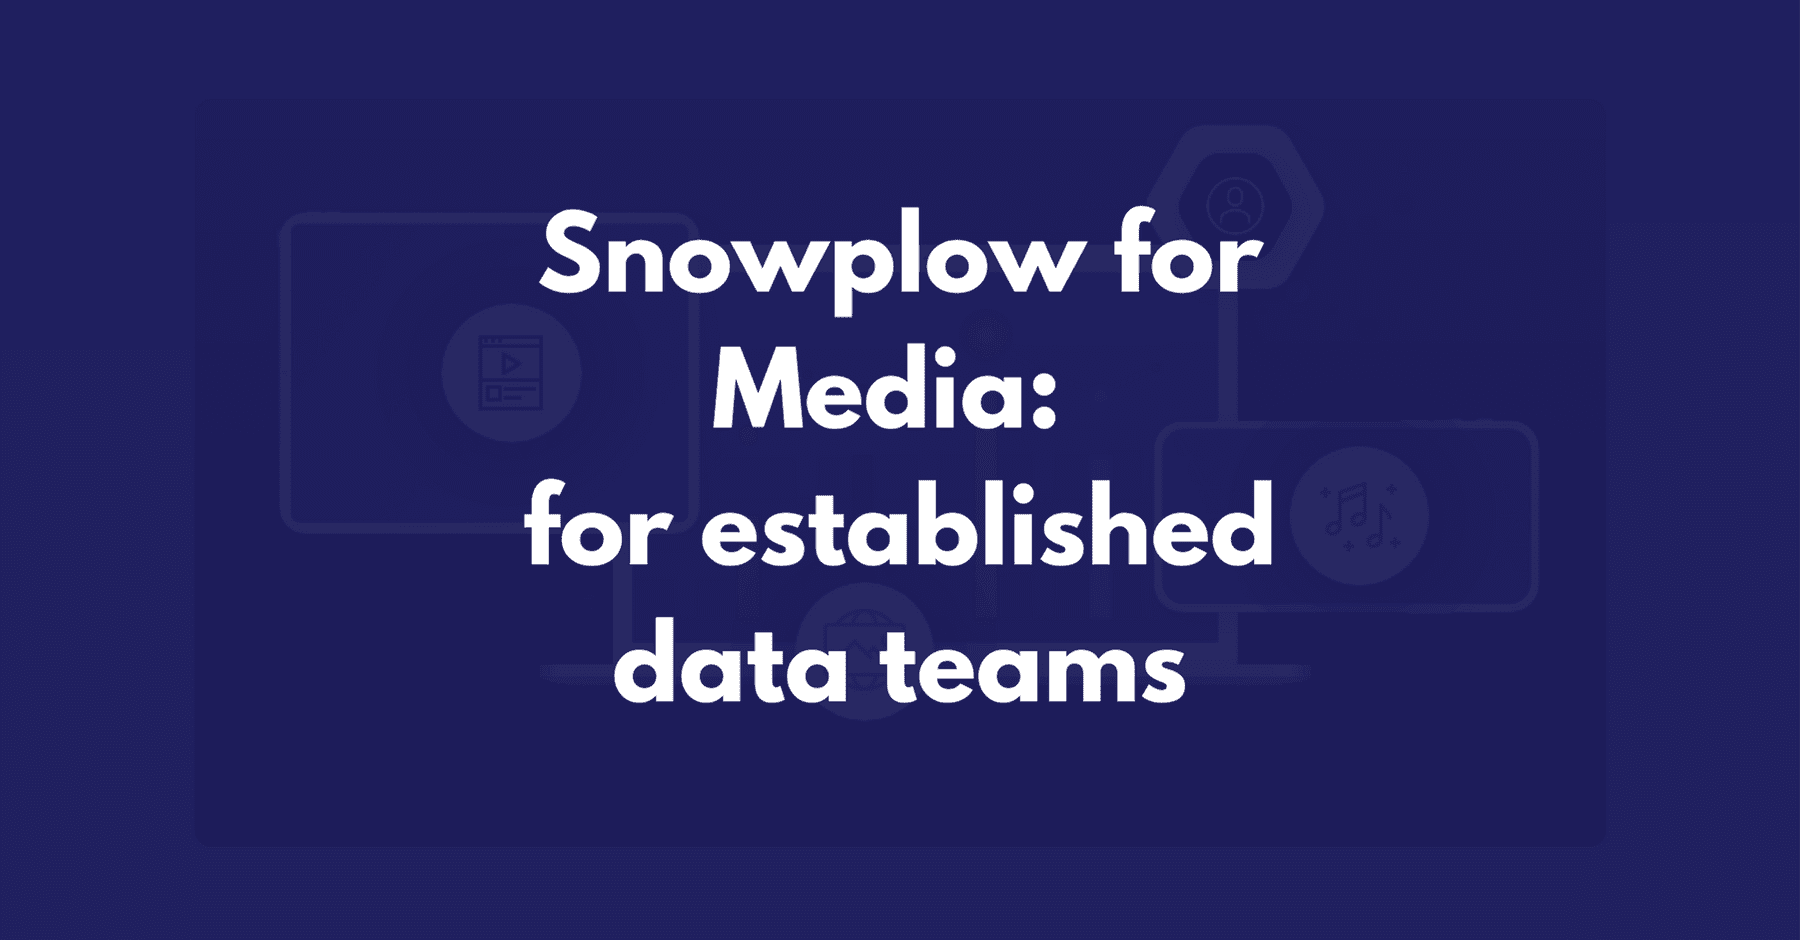 Snowplow for media part 5: what can we do with the data now we're established?